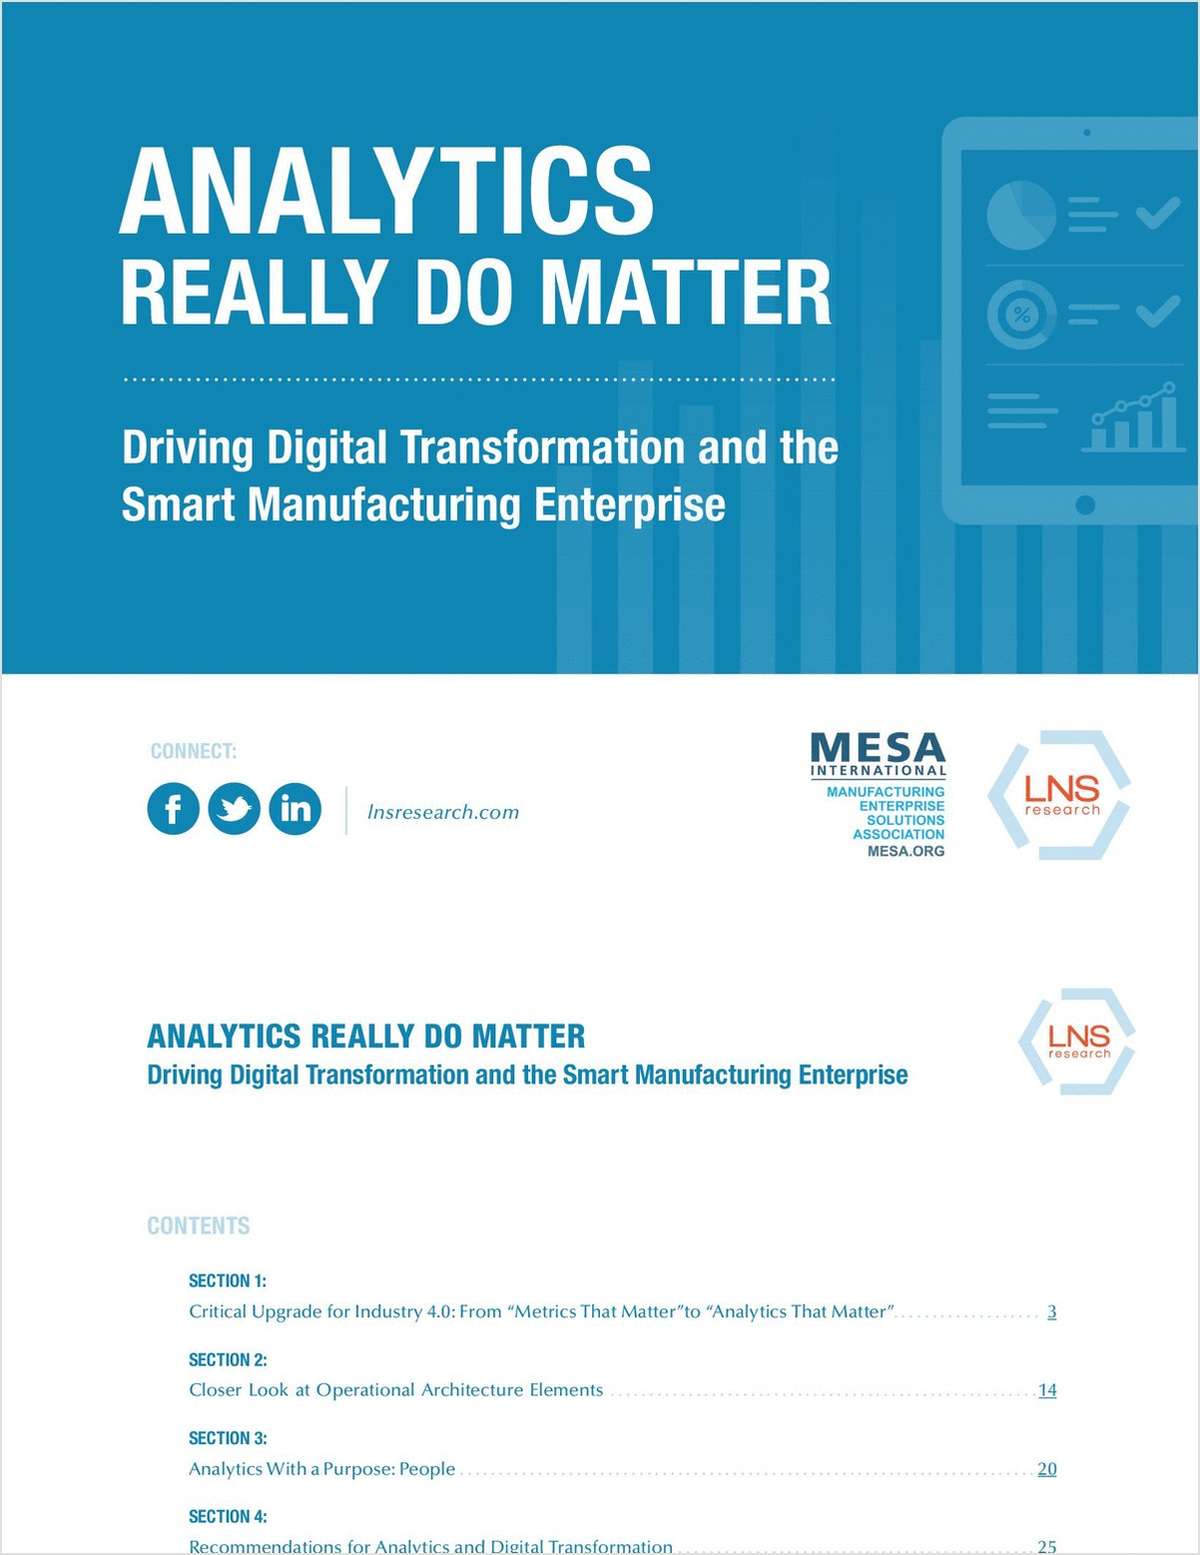 Driving Digital Transformation and the Smart Manufacturing Enterprise